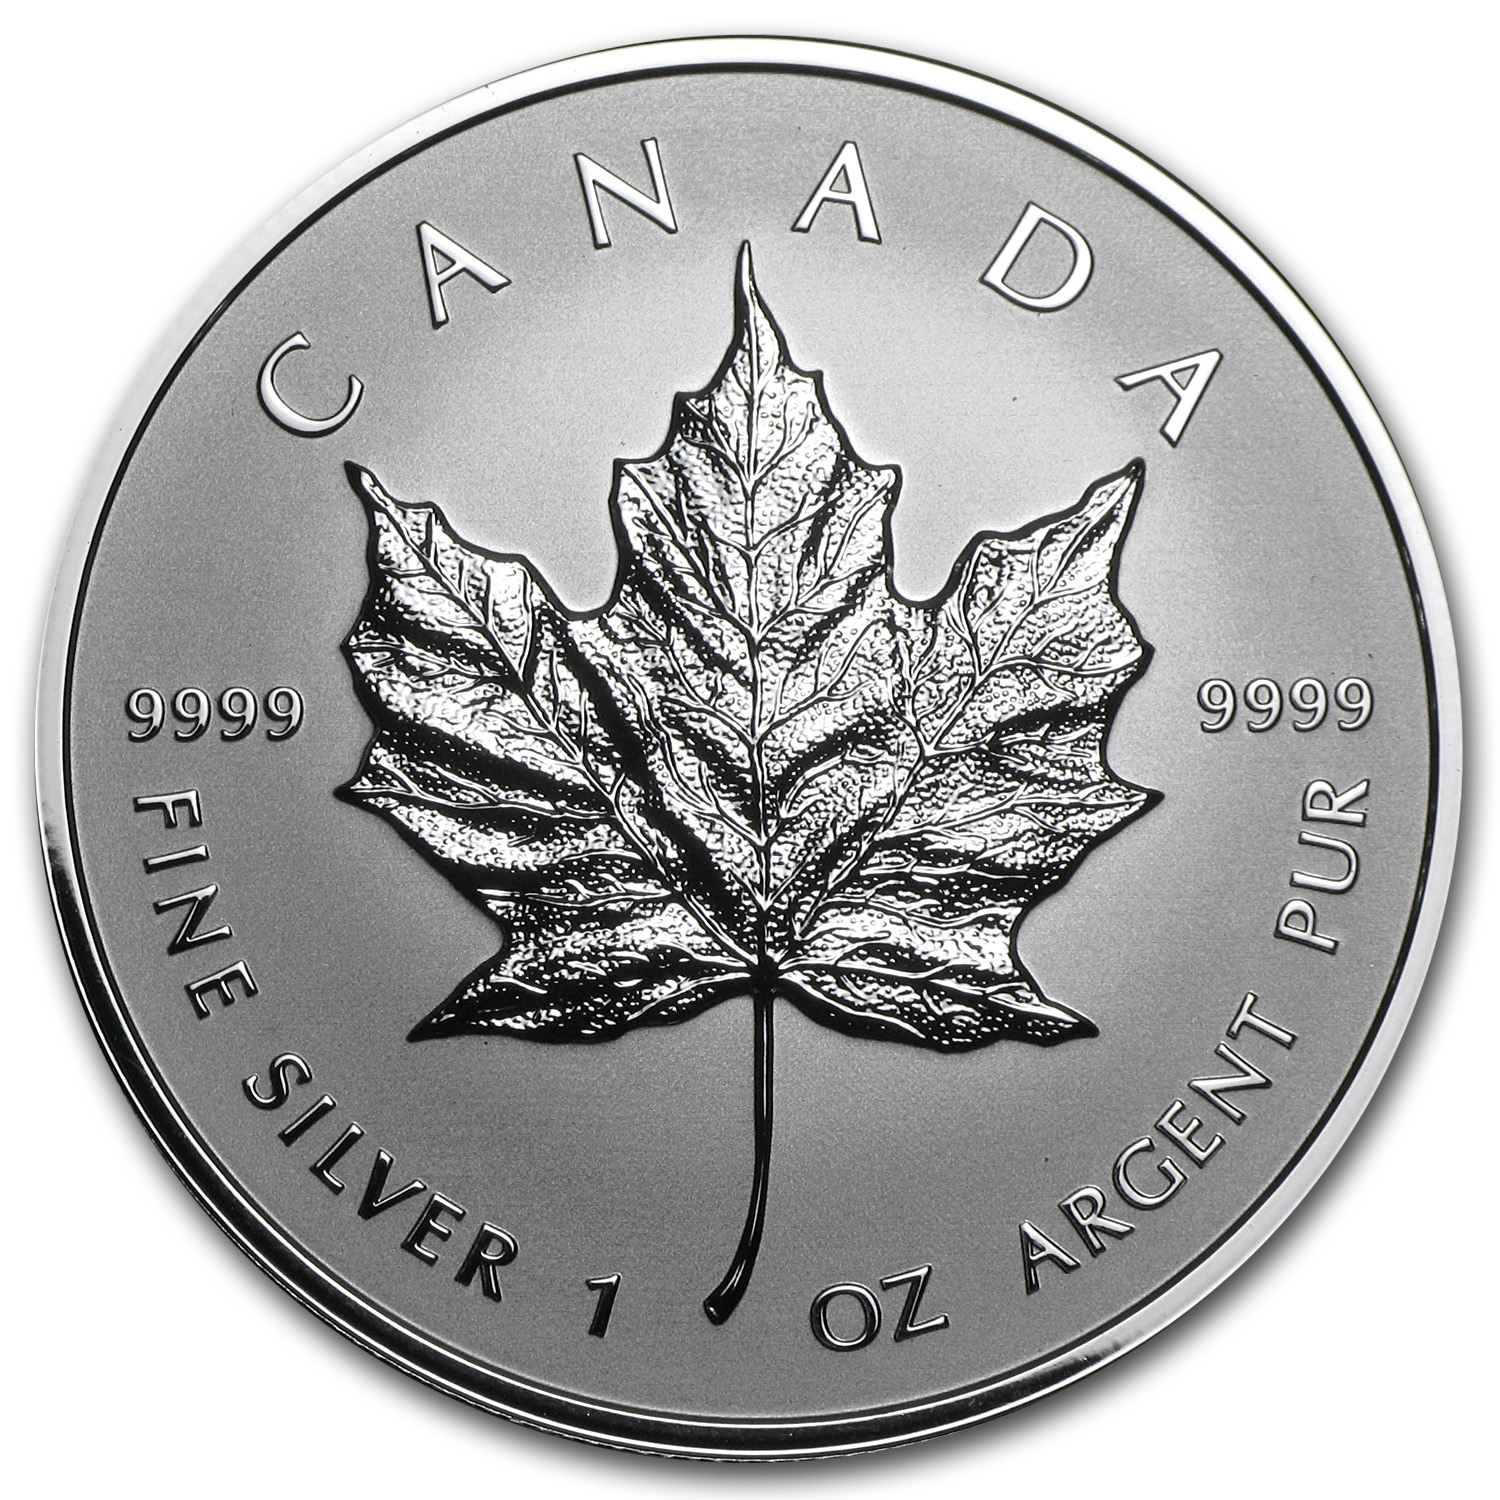 1 oz silver maple leaf coin value